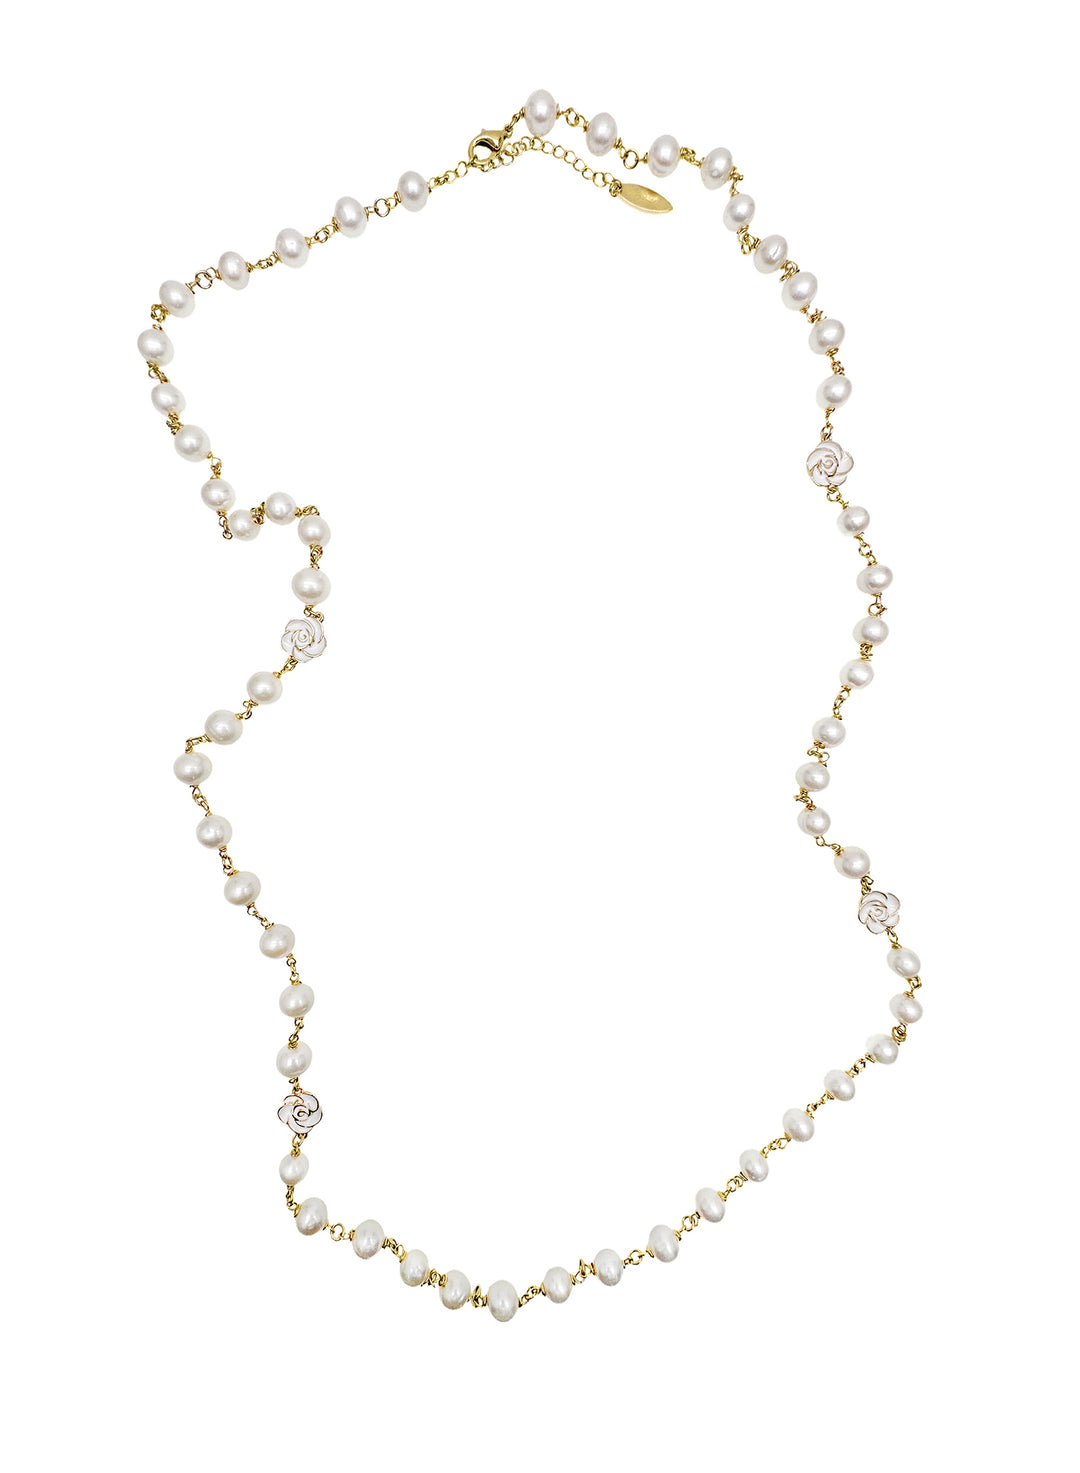 Timeless Freshwater Pearls with White Rose Flowers Long Necklace LN061 - FARRA